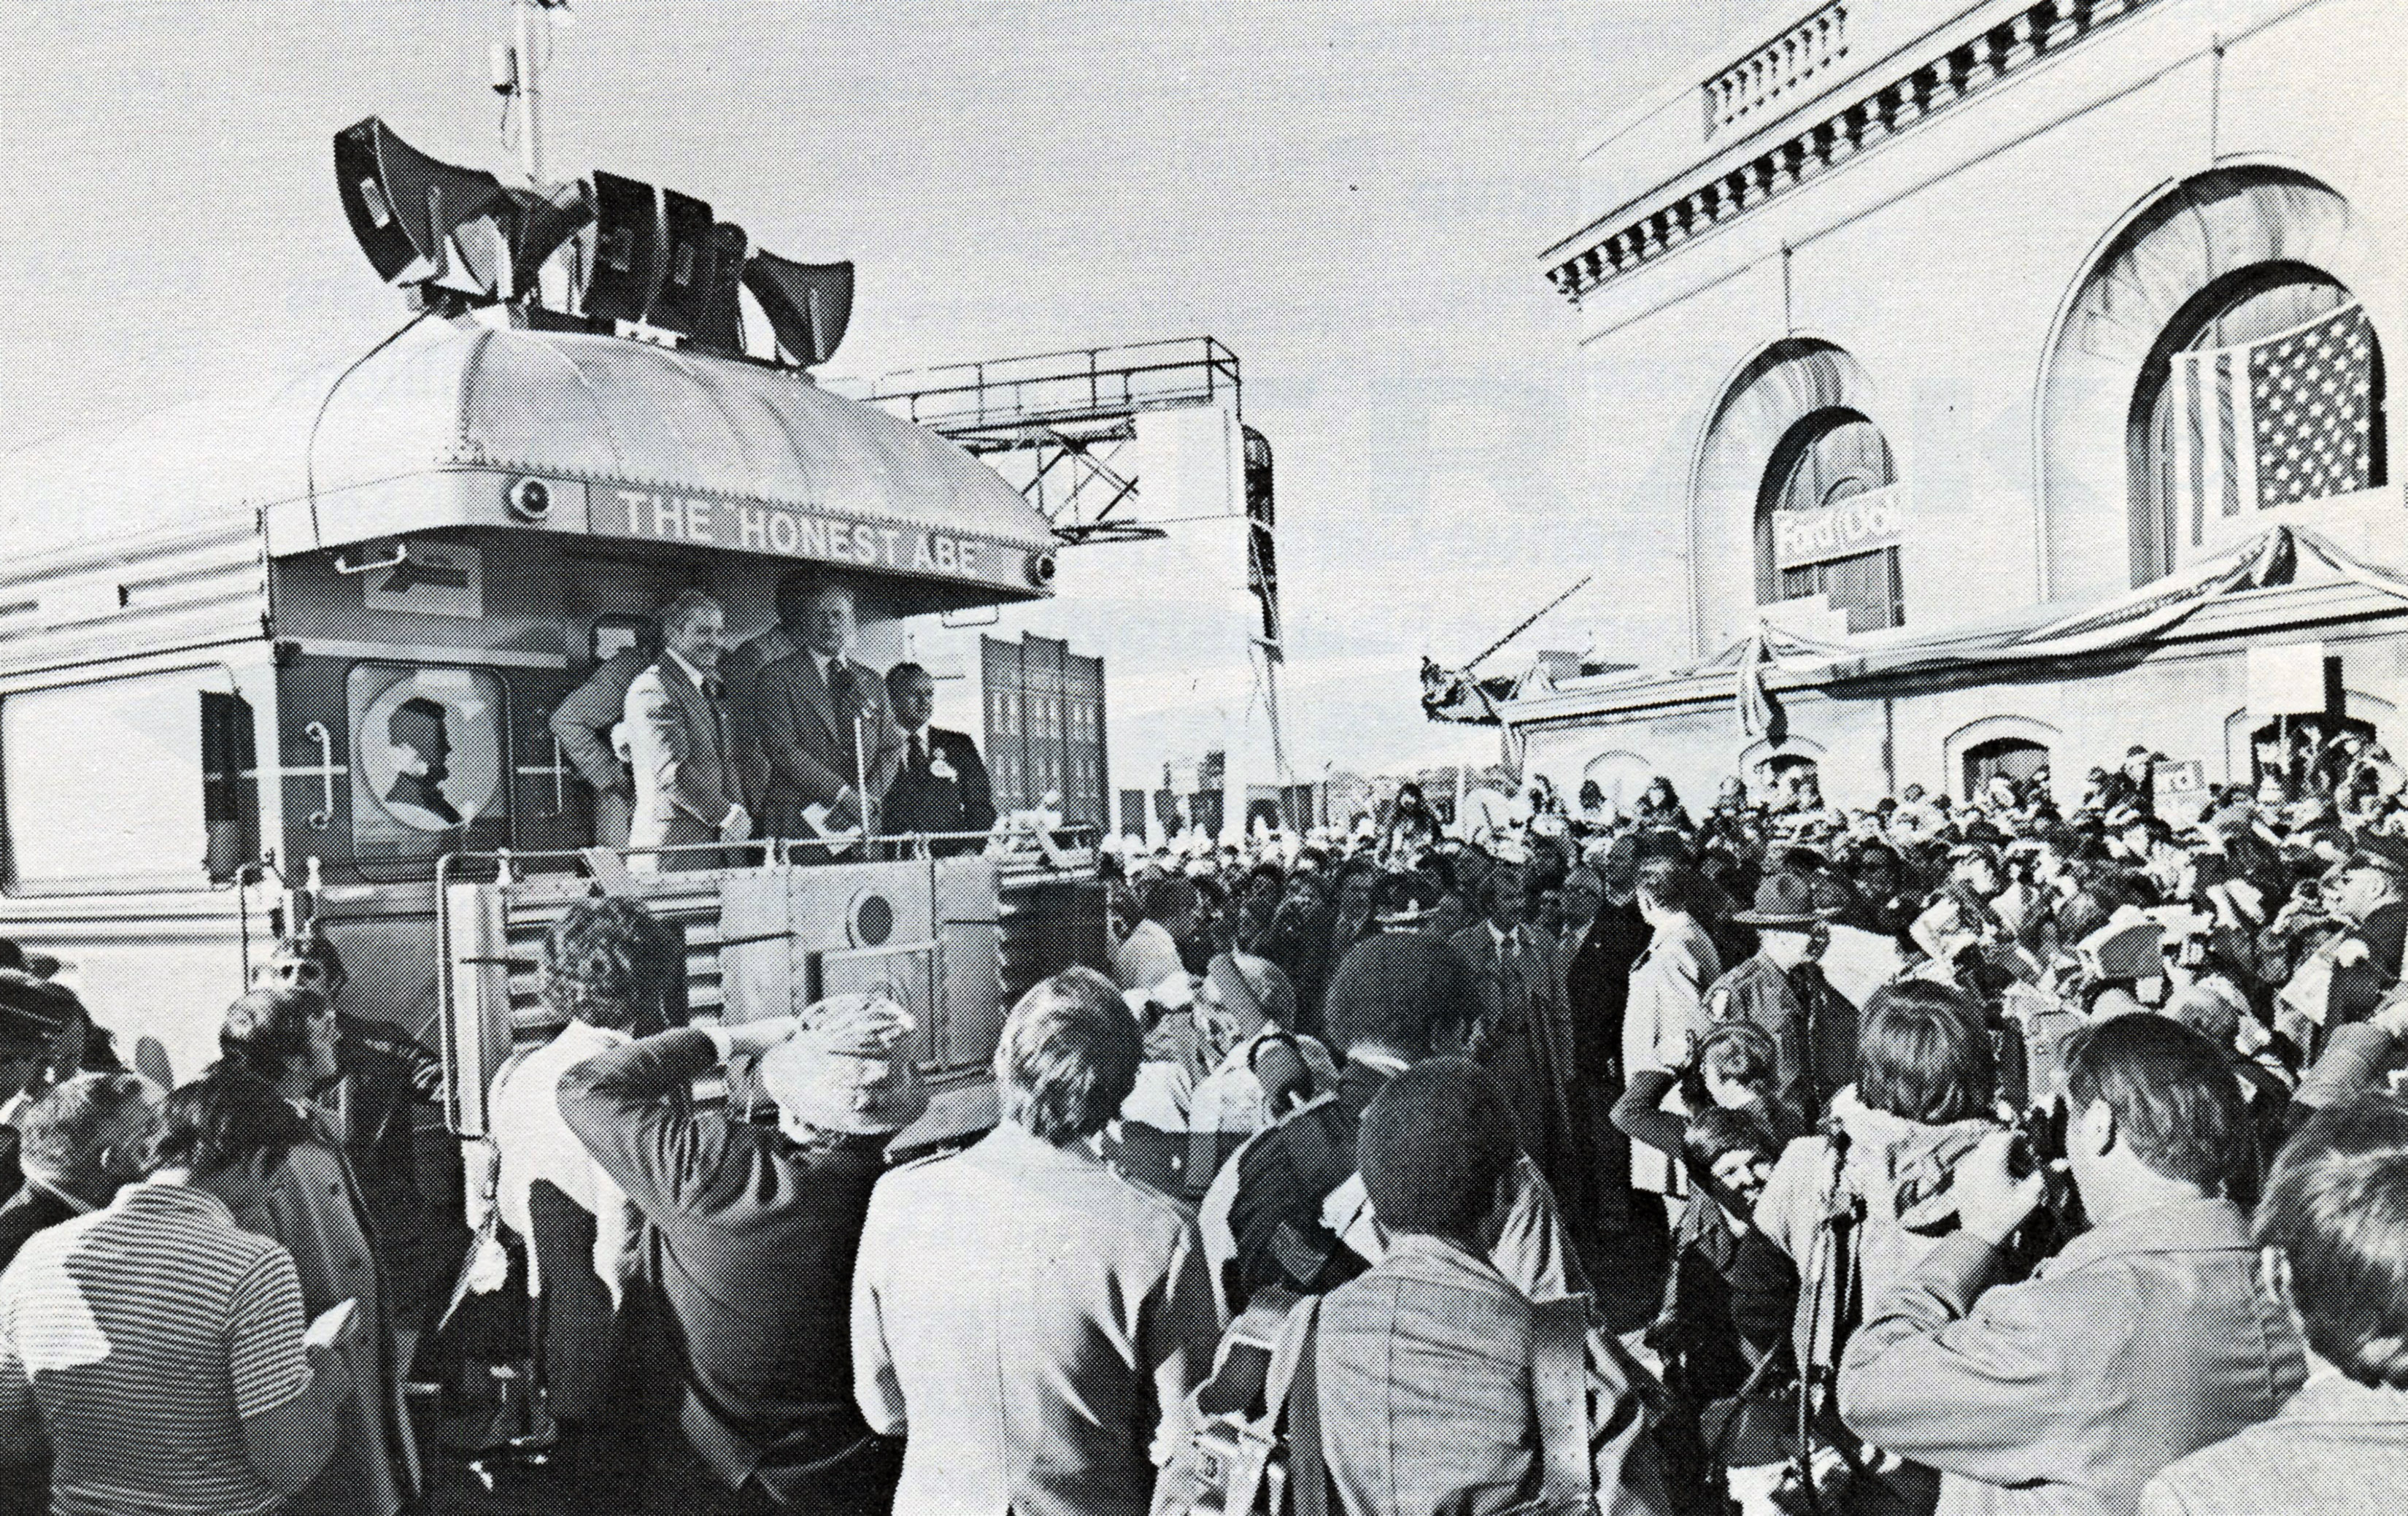 https://history.amtrak.com/archives/president-gerald-ford-greets-supporters-in-joliet-ill/@@download/item/BW%20Photo_President%20Ford_1976%20AR_Amtrak_WM.jpg